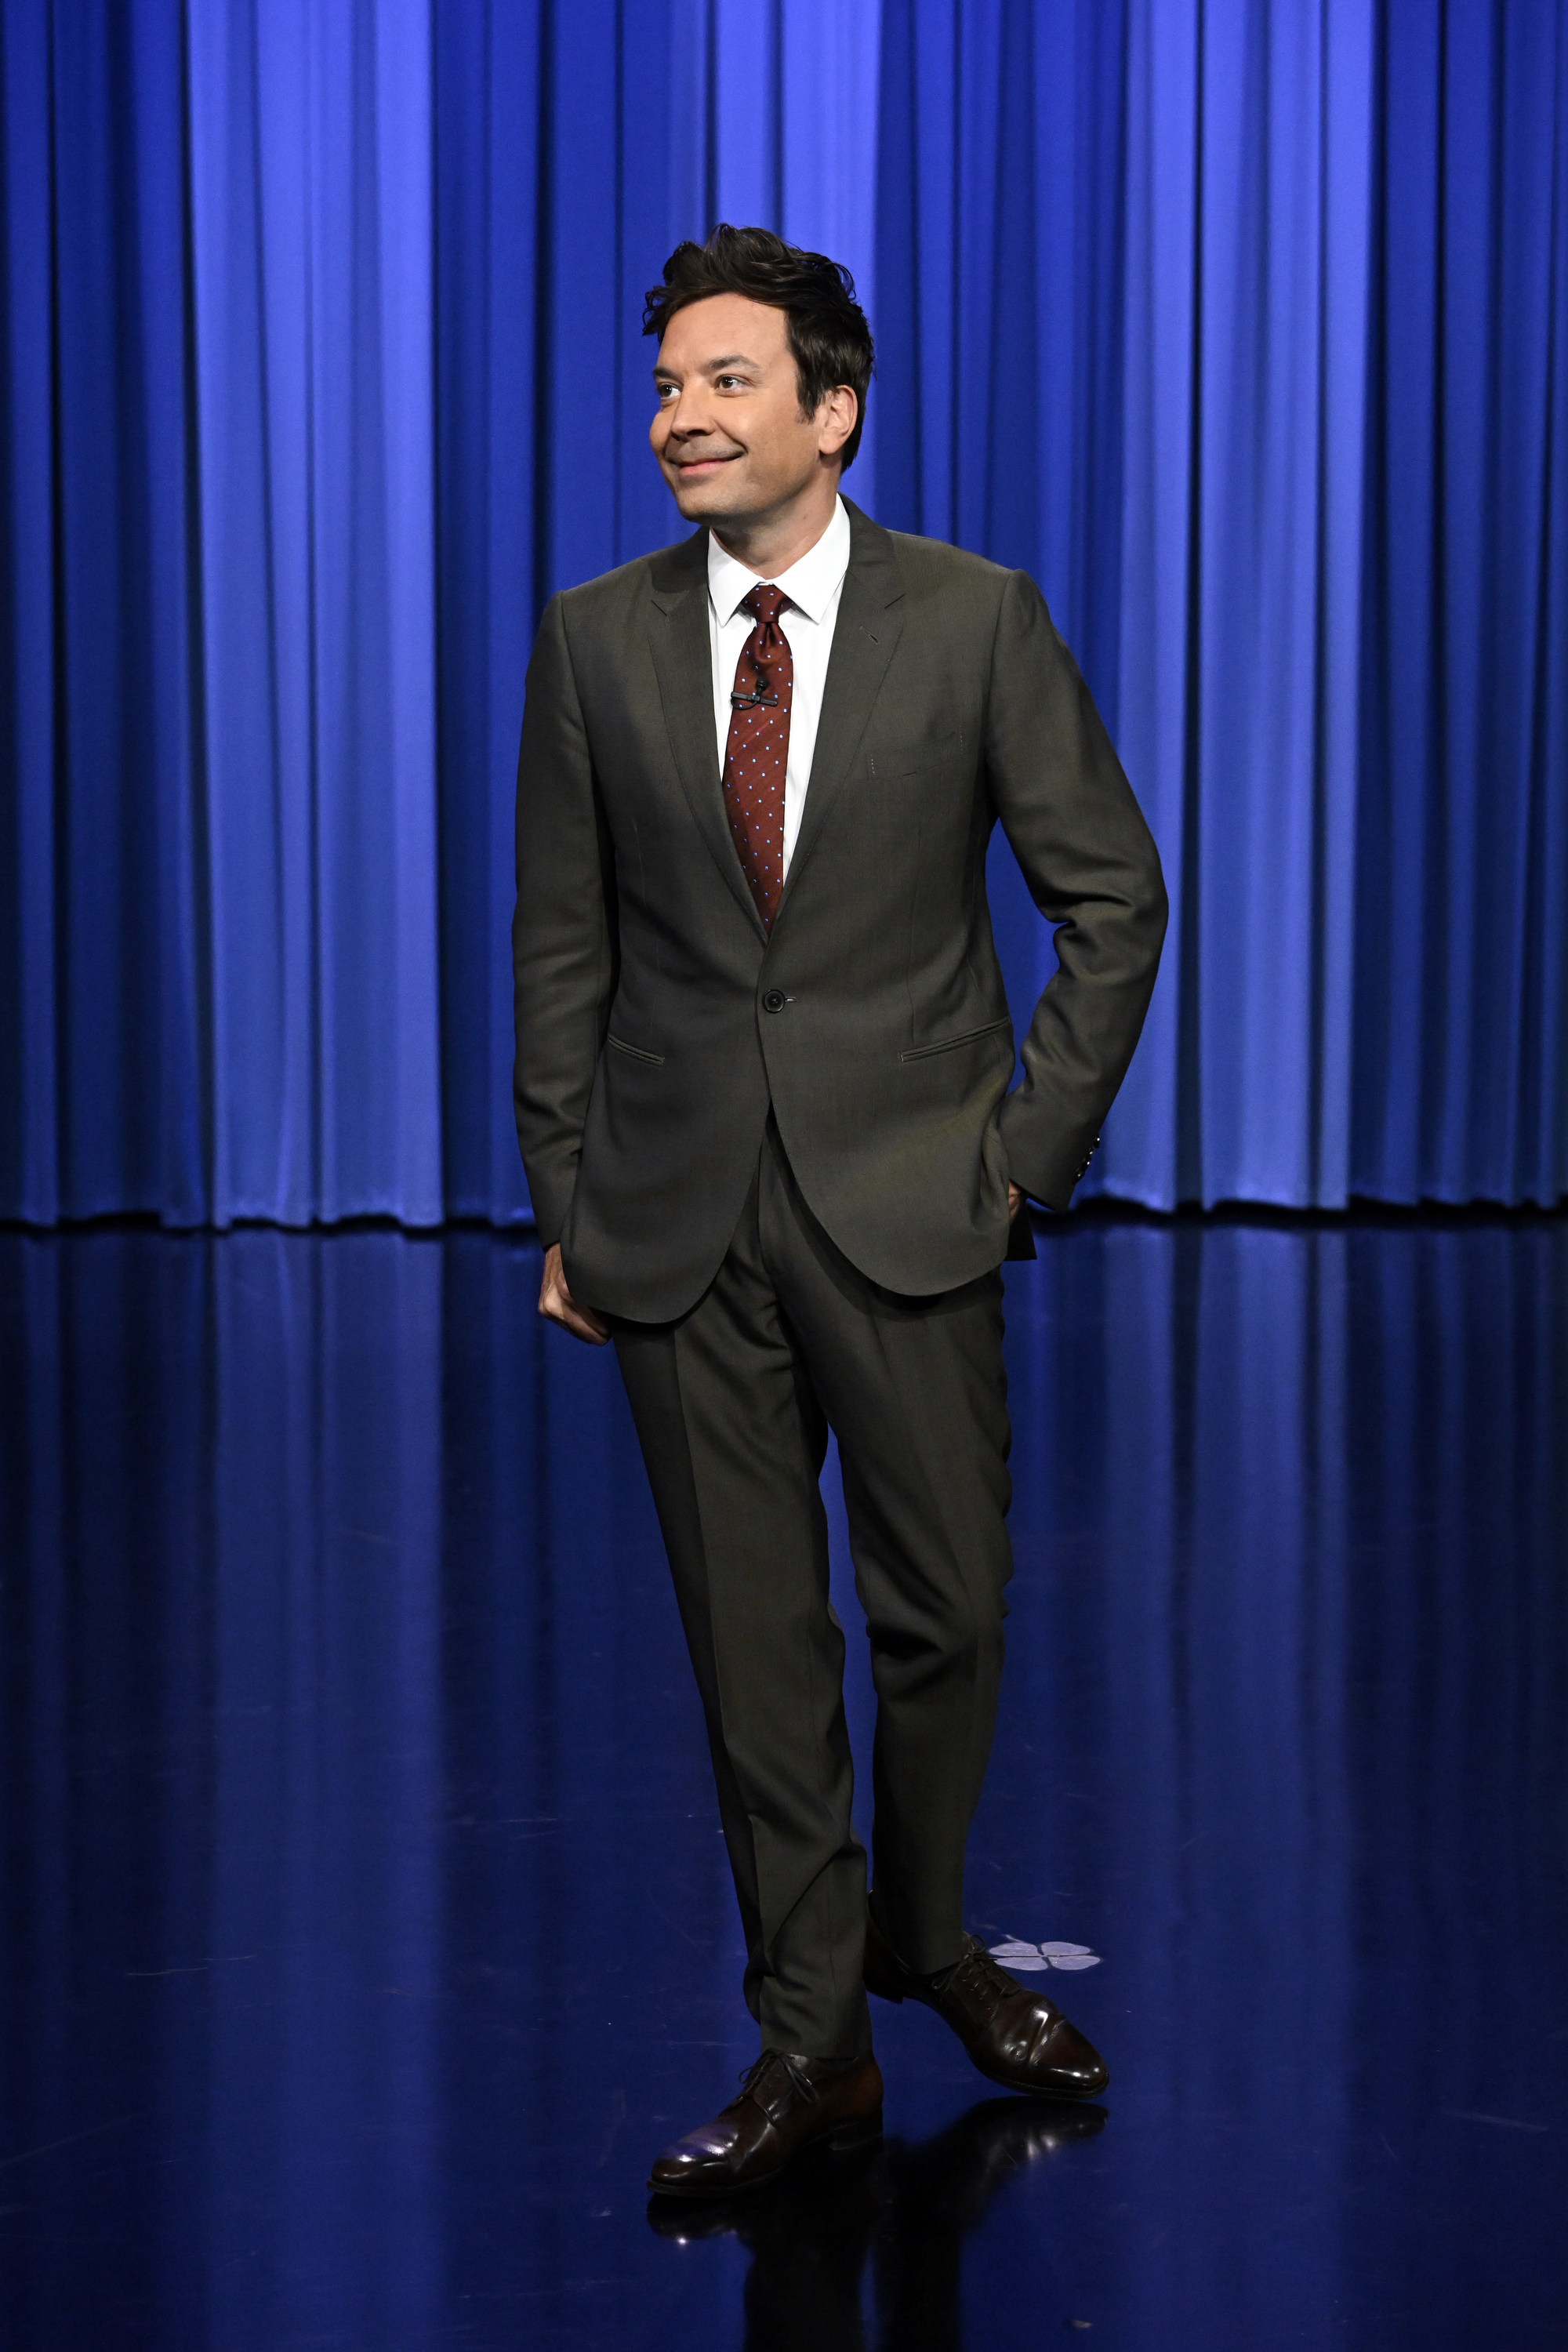 Jimmy Fallon stands on the stage of The Tonight Show